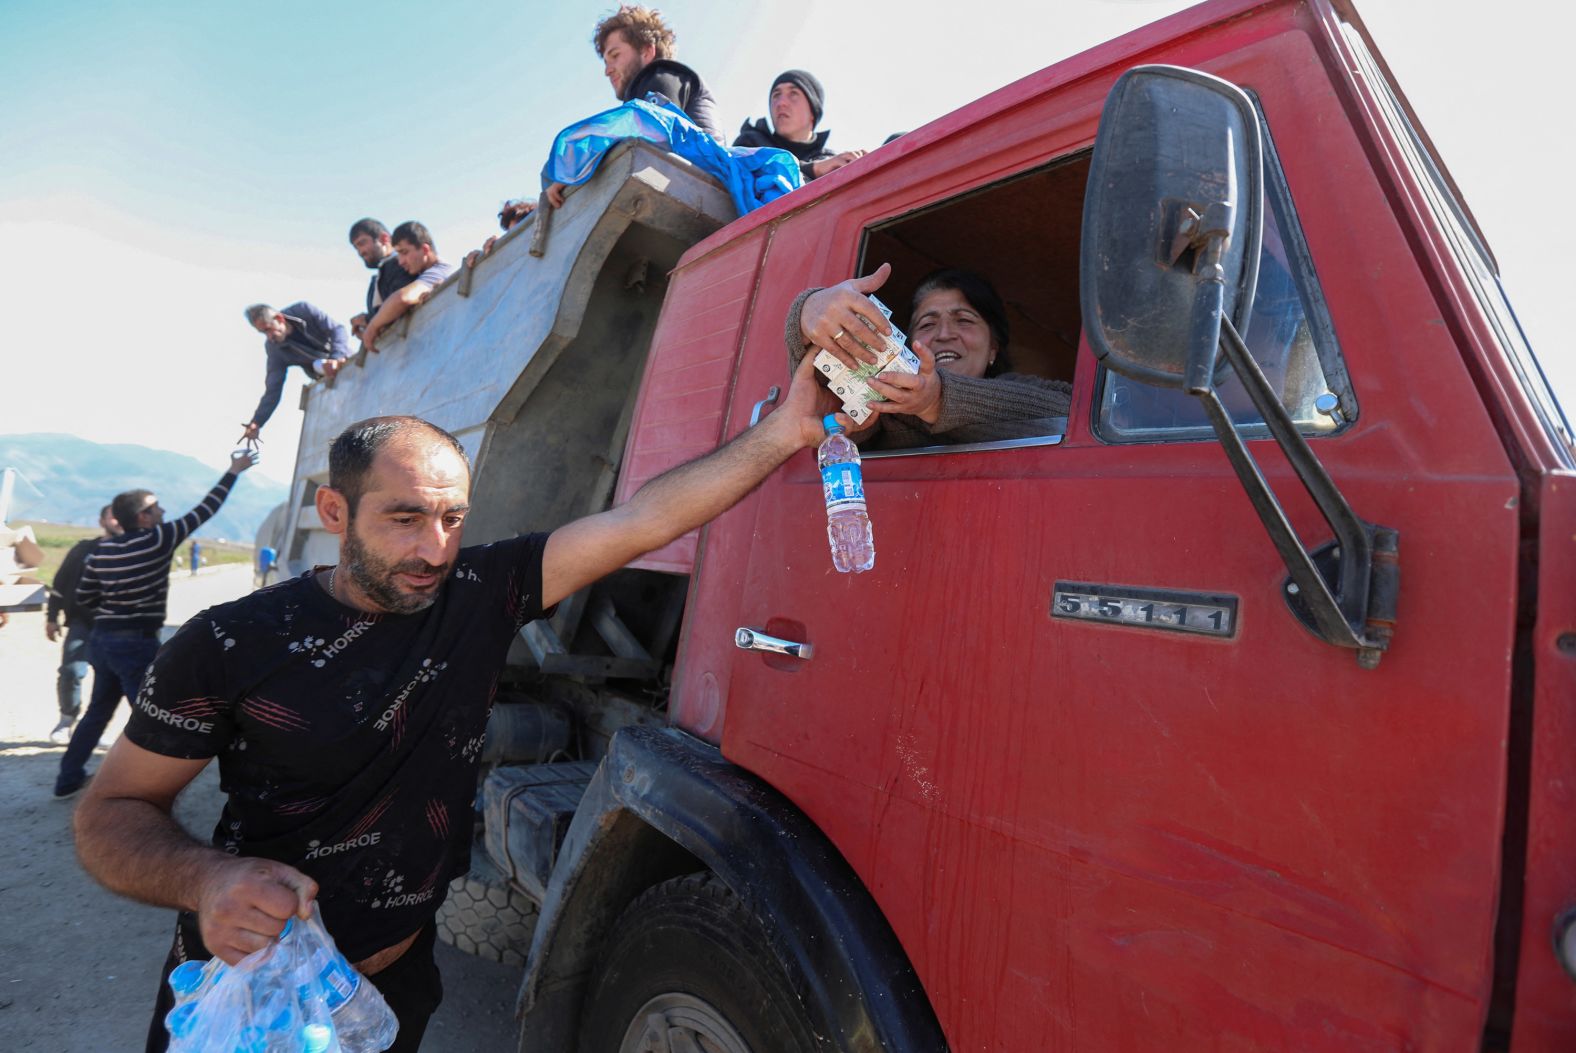 David Harapetyan, an ethnic Armenian and taxi driver who came to Kornidzor from Russia to provide assistance, hands food and water to people from Nagorno-Karabakh on September 27.